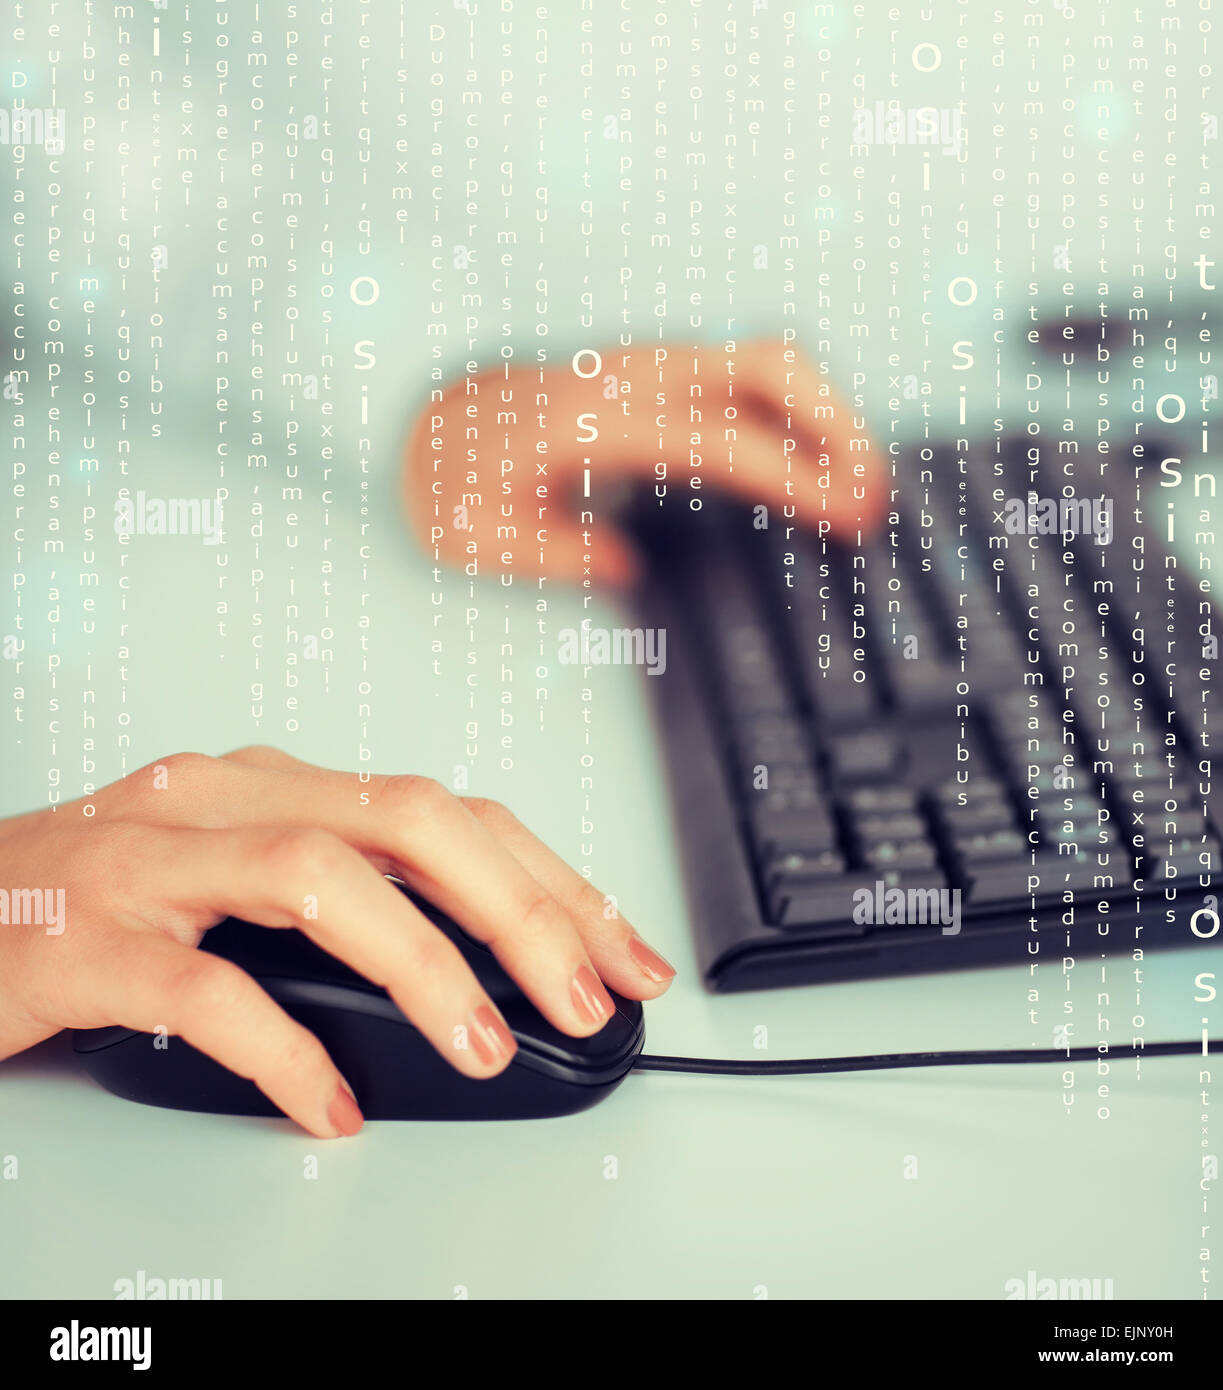 woman hands with keyboard and mouse Stock Photo